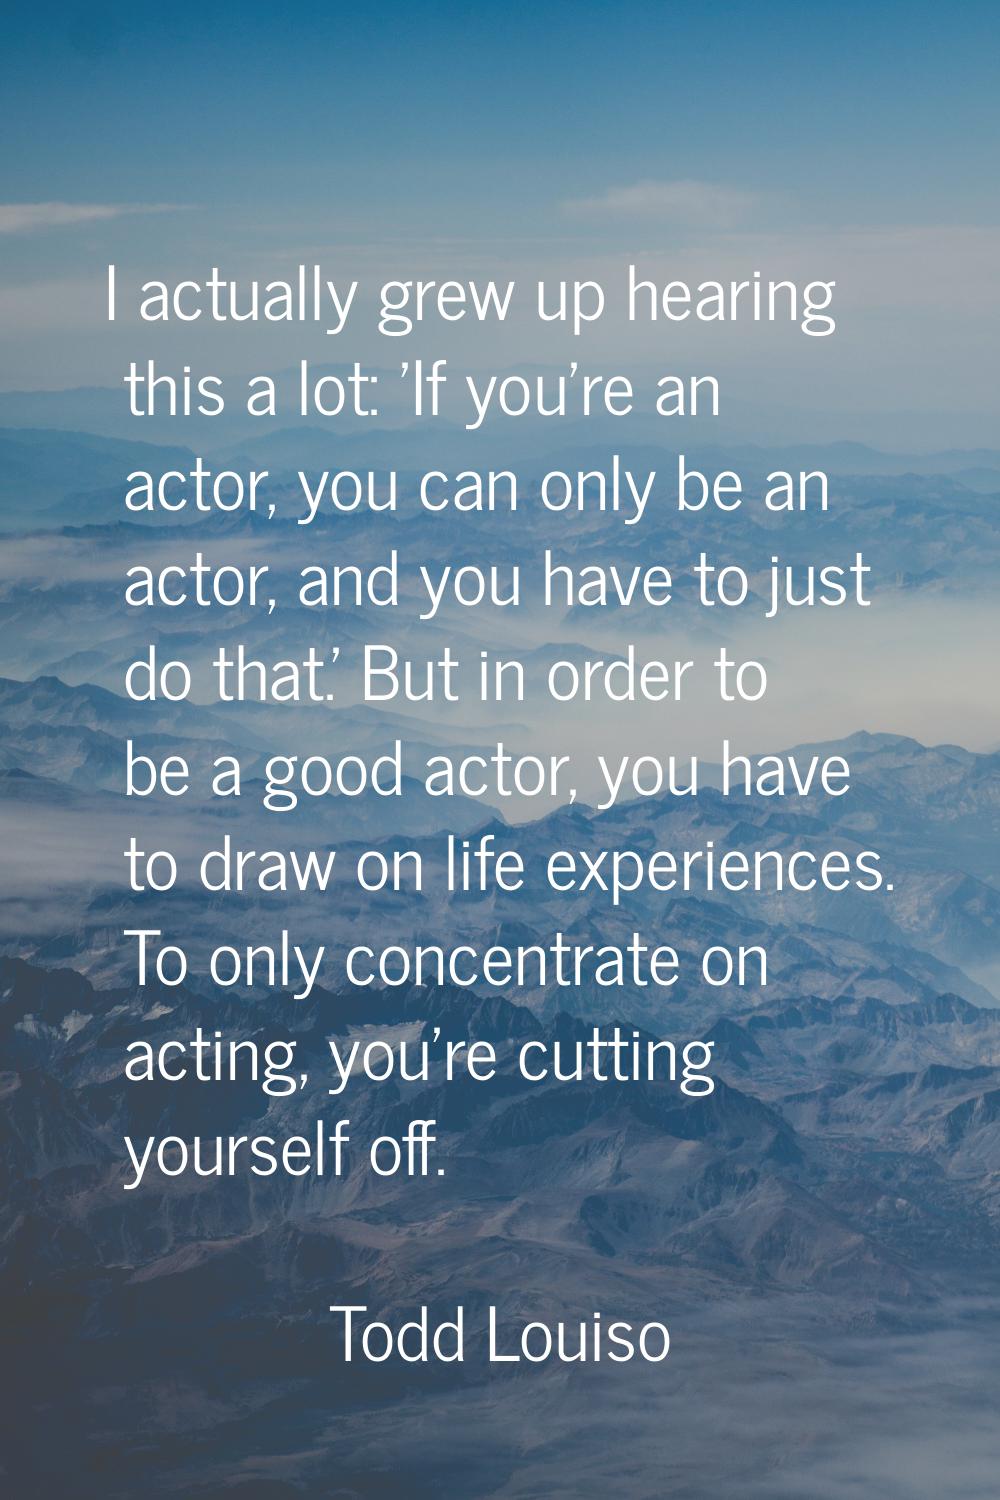 I actually grew up hearing this a lot: 'If you're an actor, you can only be an actor, and you have 